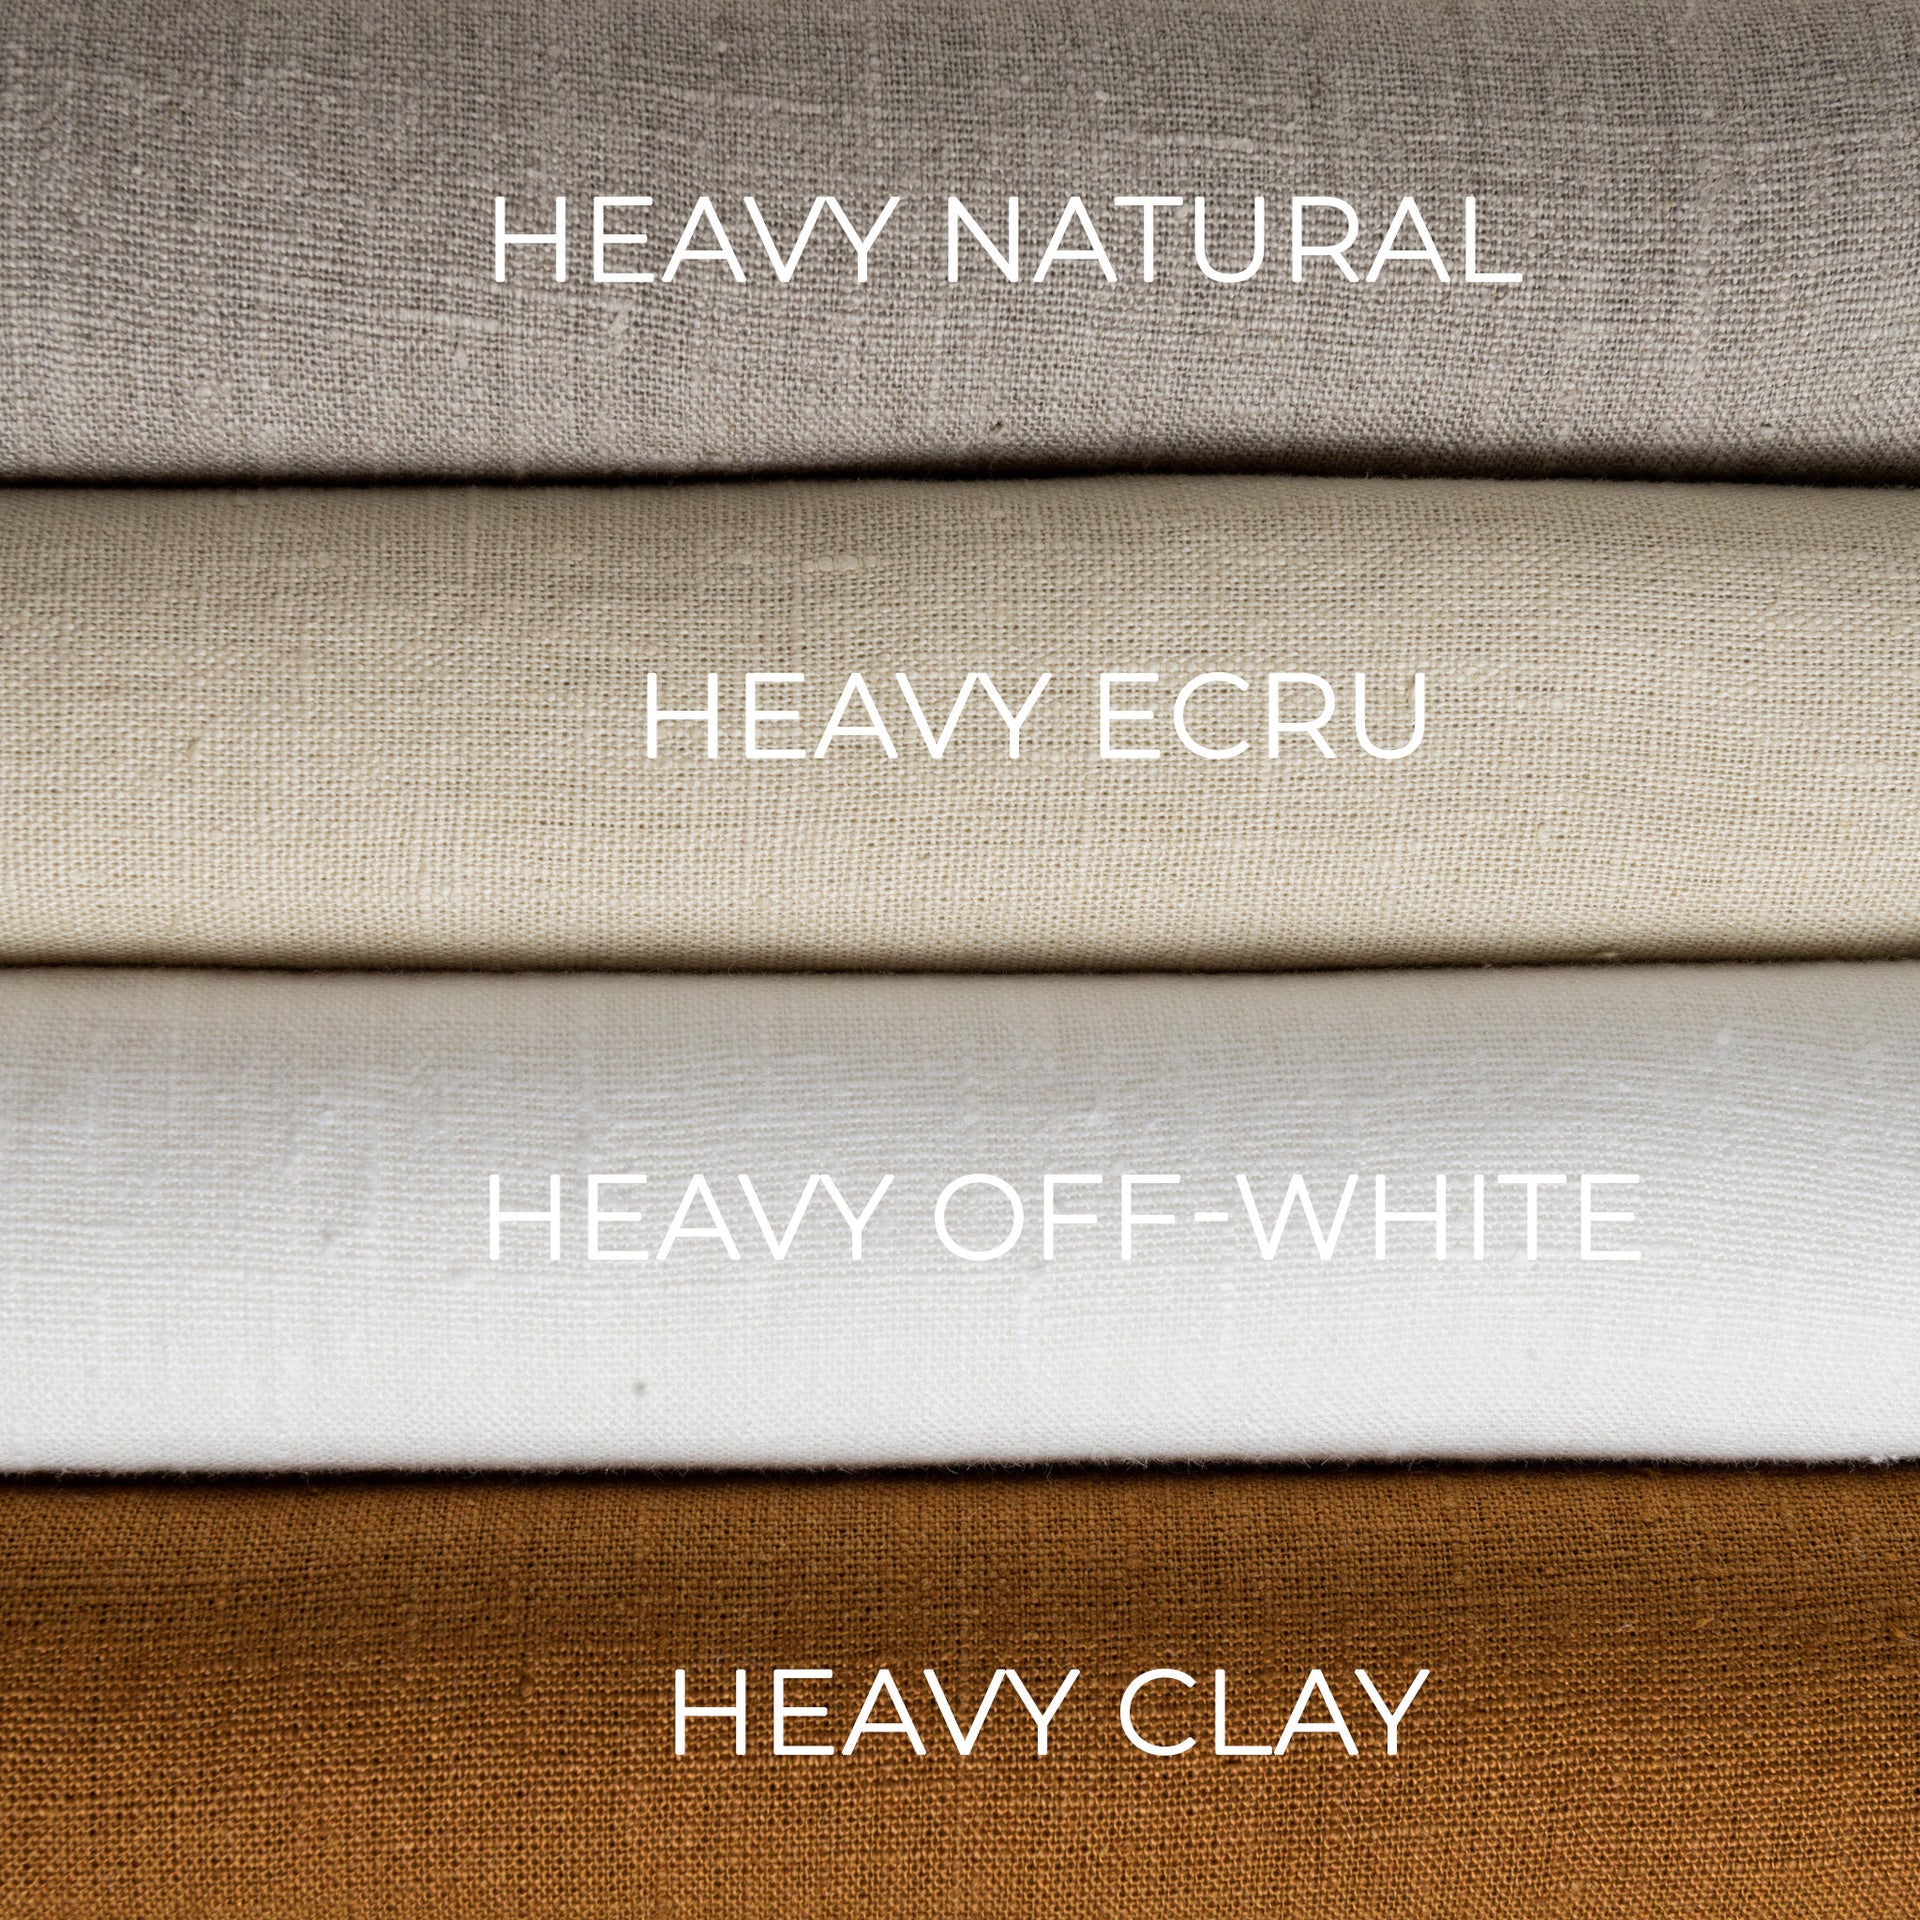 @Color: Heavy Weight Natural, Color: Heavy Weight Ecru, Color: Heavy Weight Off-White, Color: Heavy Weight Clay, TOP & BOTTOM COLOR: Heavy Natural, TOP & BOTTOM COLOR: Heavy Ecru, TOP & BOTTOM COLOR: Heavy Off-White, TOP & BOTTOM COLOR: Heavy Clay